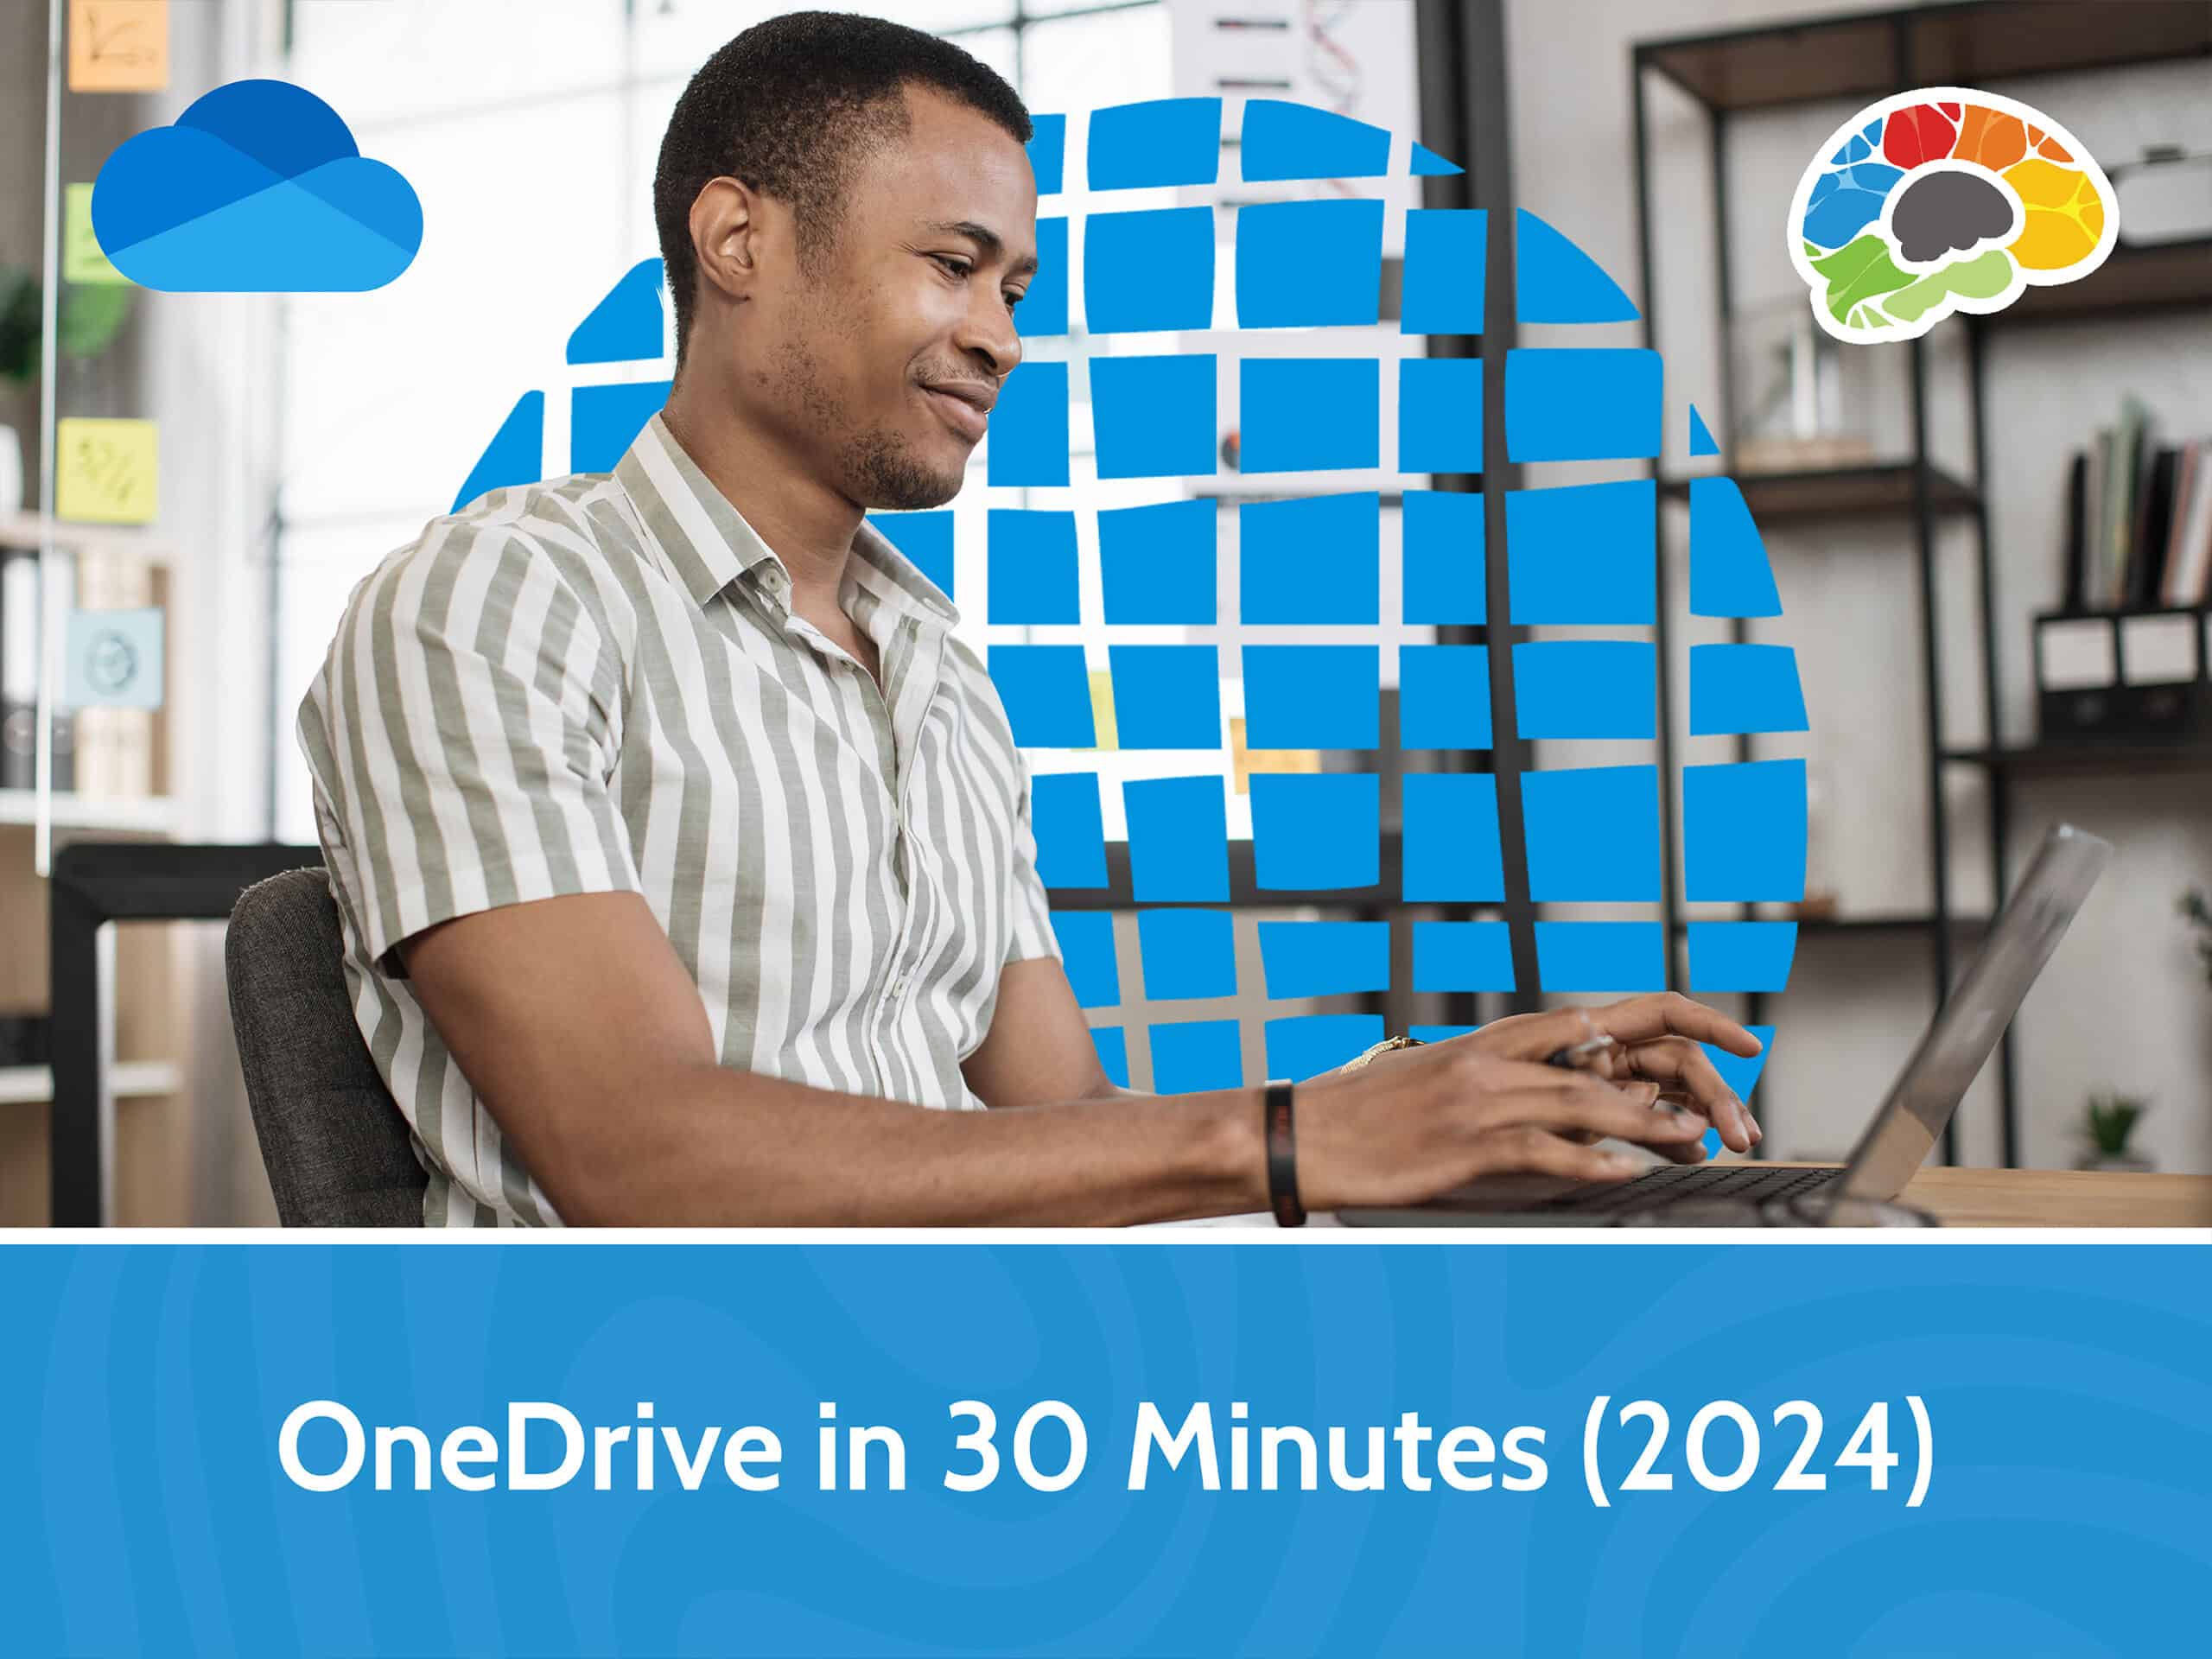 OneDrive in 30 Minutes 2024 1 scaled